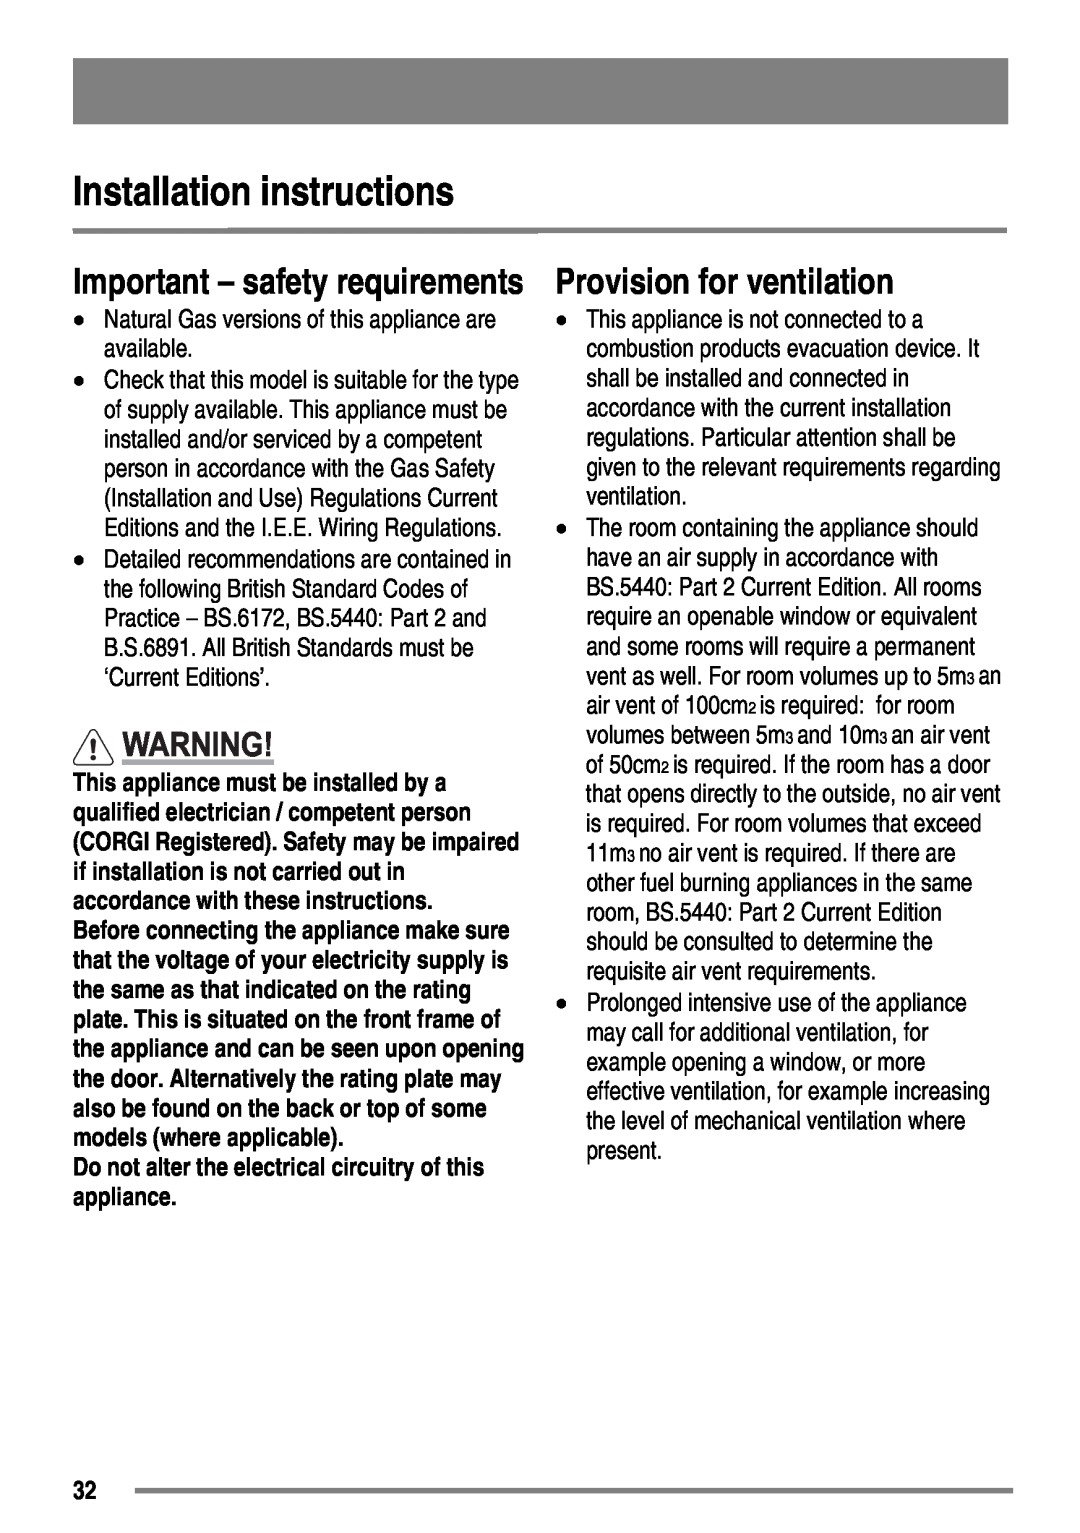 Zanussi ZKG6020 user manual Installation instructions, Provision for ventilation, Important - safety requirements 